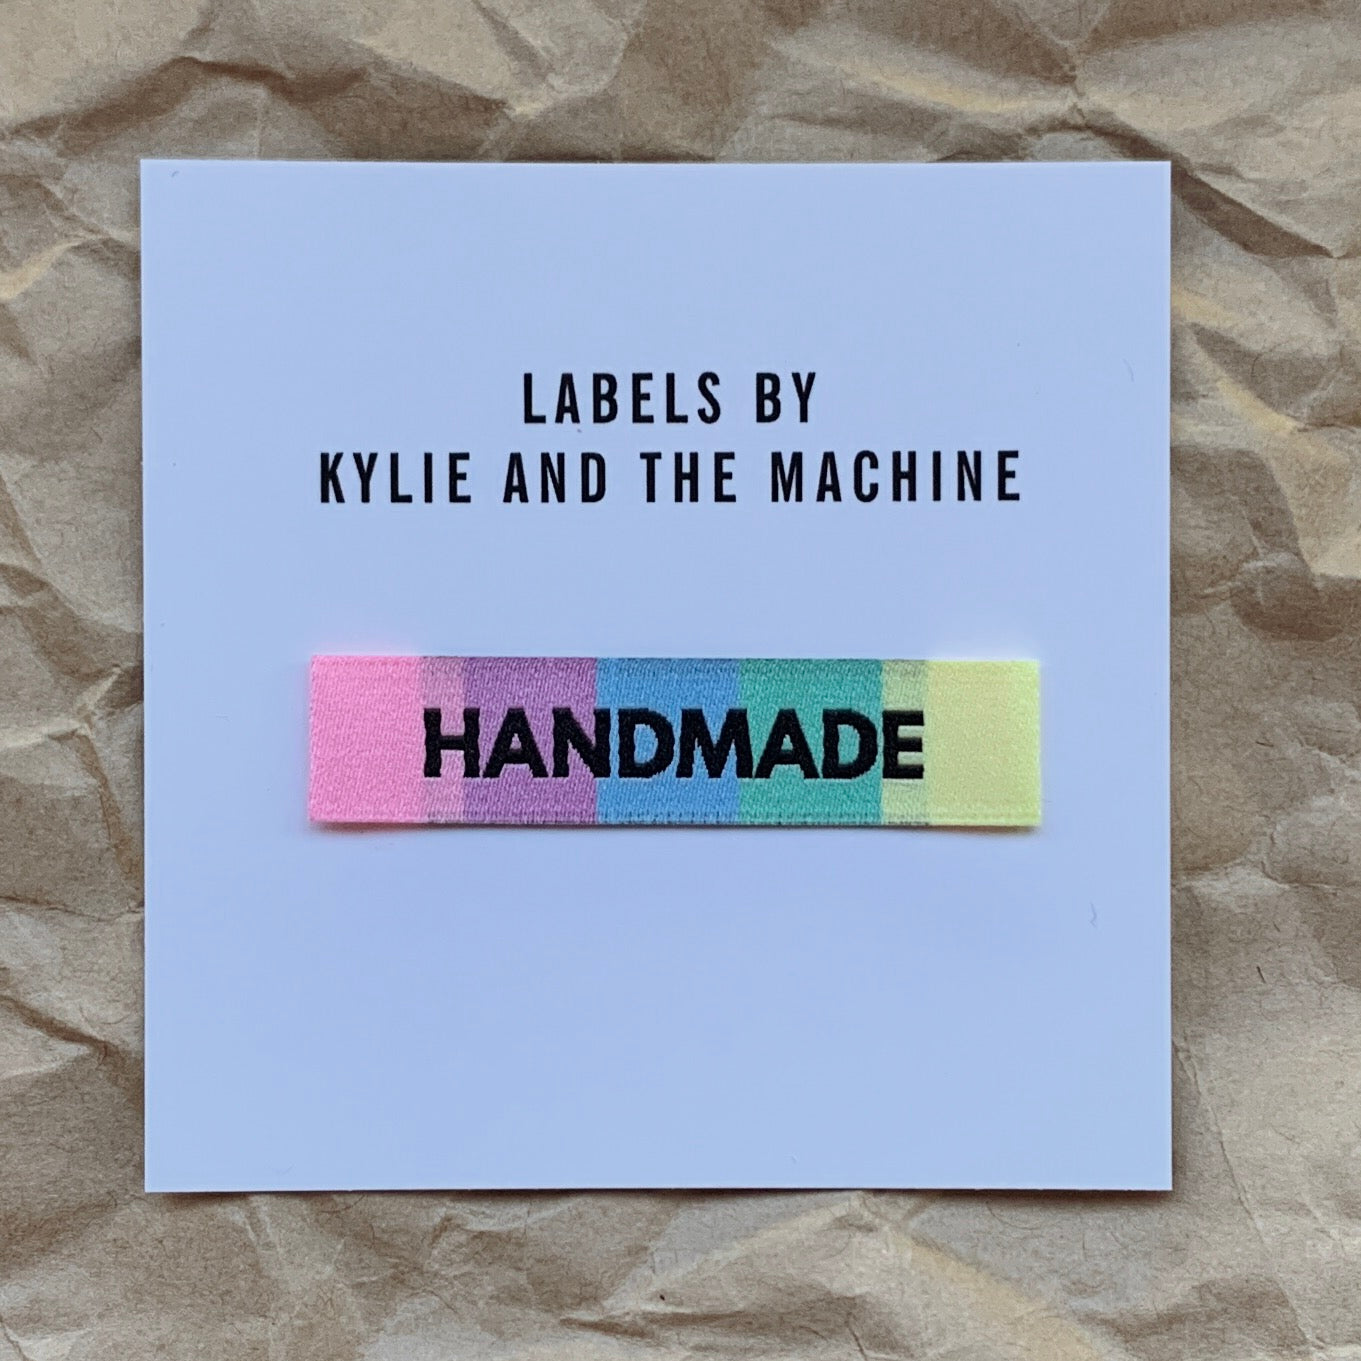 Kylie and the Machine - Rainbow "RAINBOW HANDMADE" Pack of 8 Woven Labels